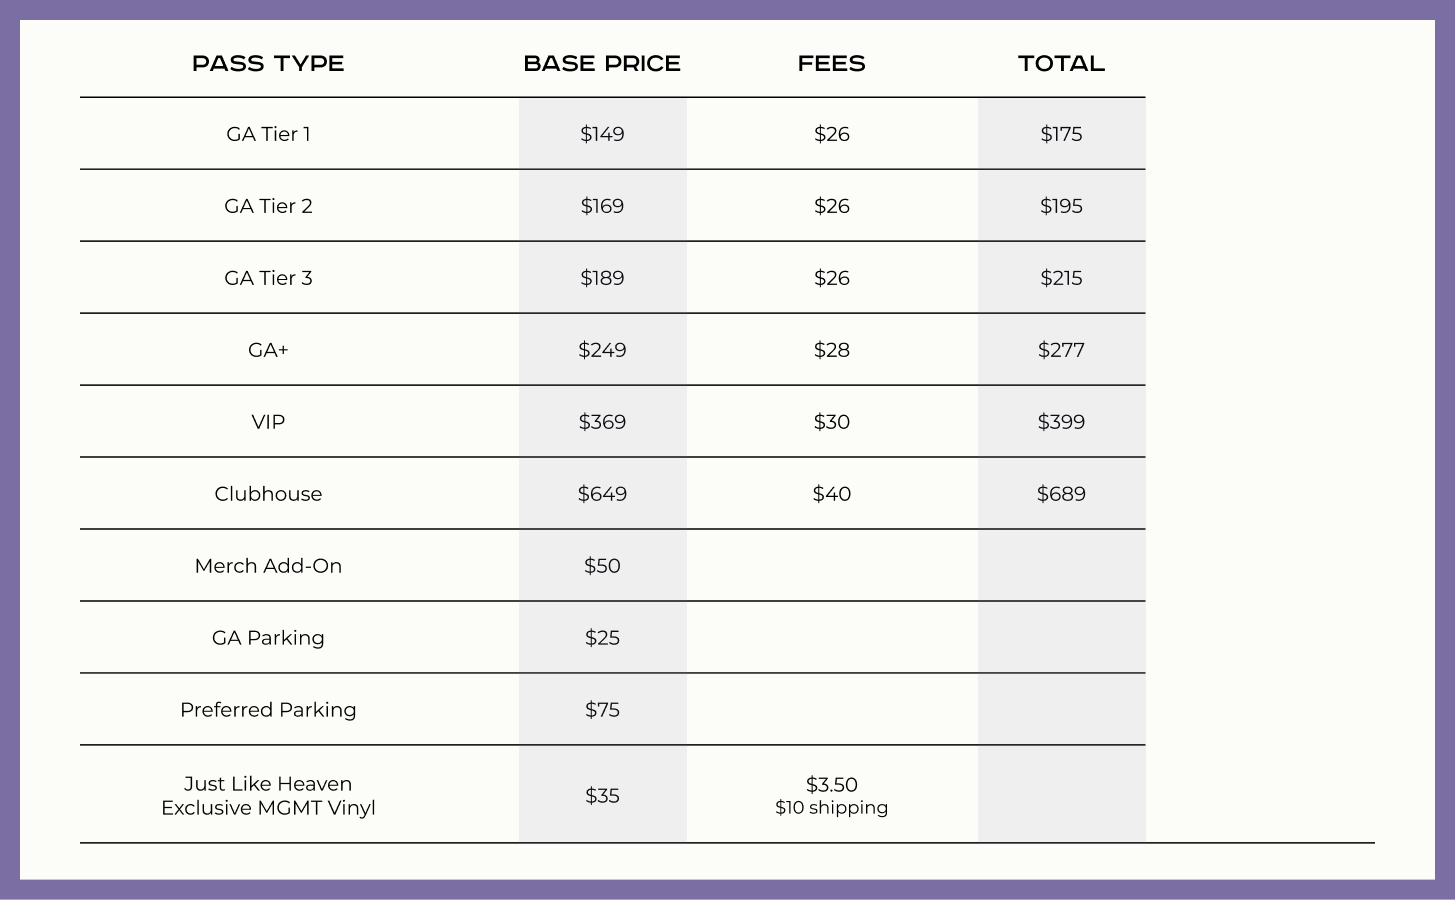 Just Like Heaven 2023 fee structure graphic